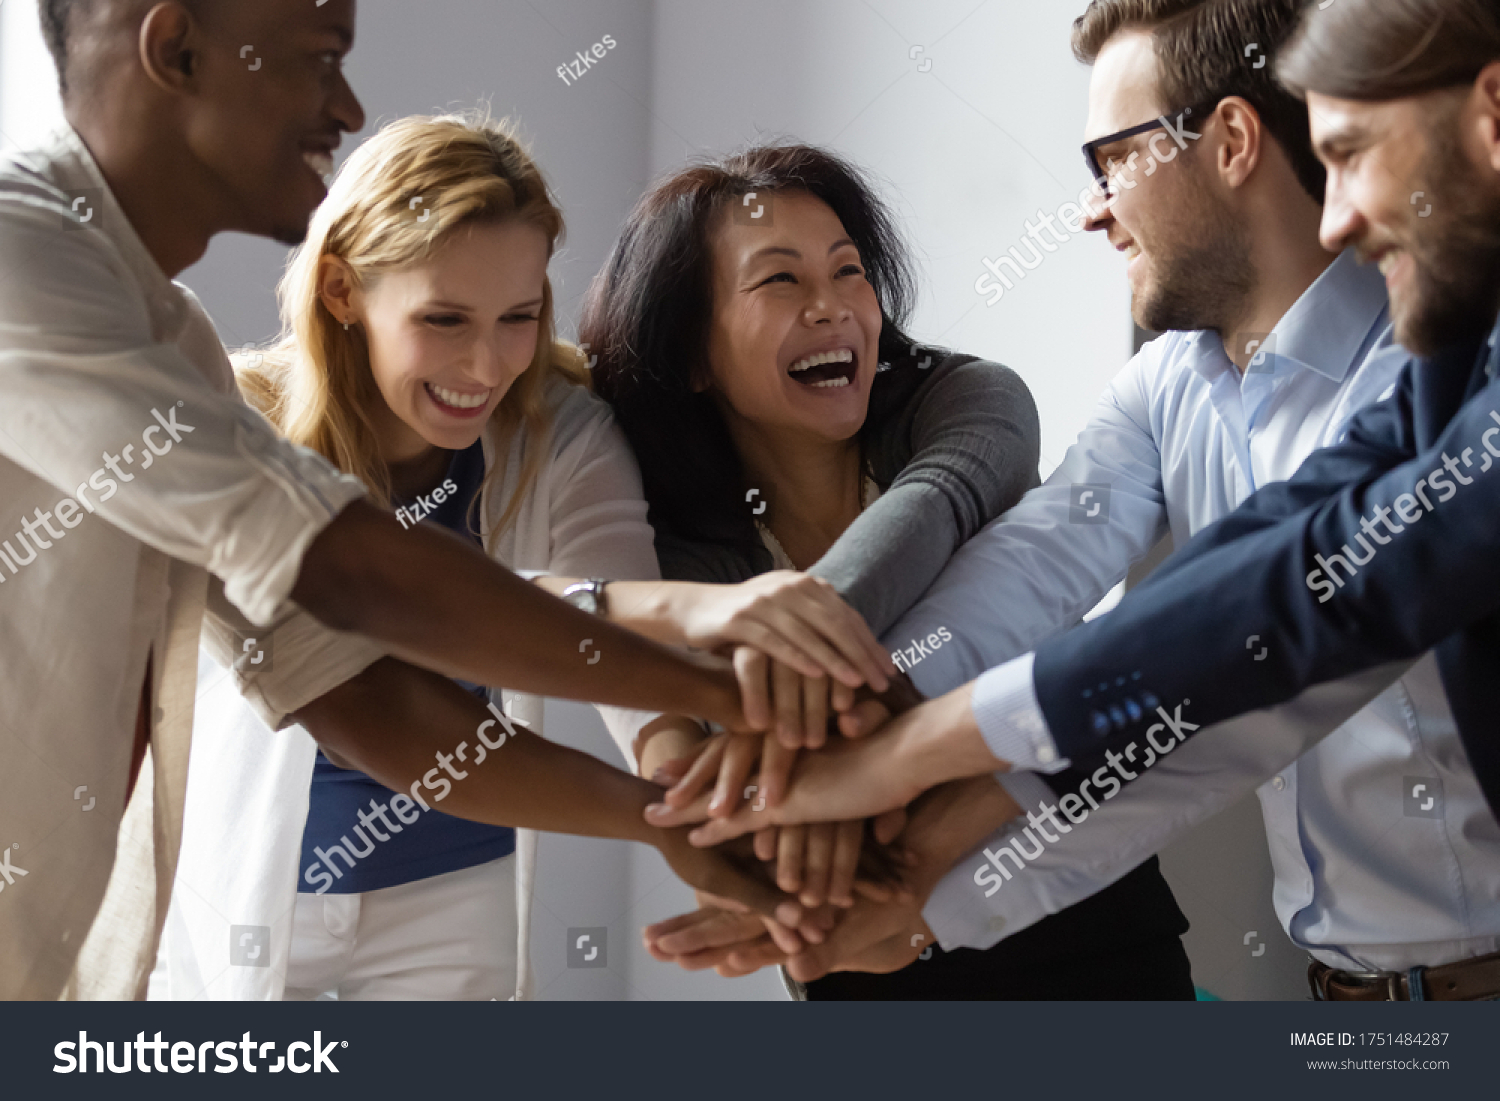 Close up image overjoyed 5 multi ethnic business people stack touch arms palms together celebrating promotion reward, succeed common aim. Give high five symbol of unity, team building activity concept #1751484287